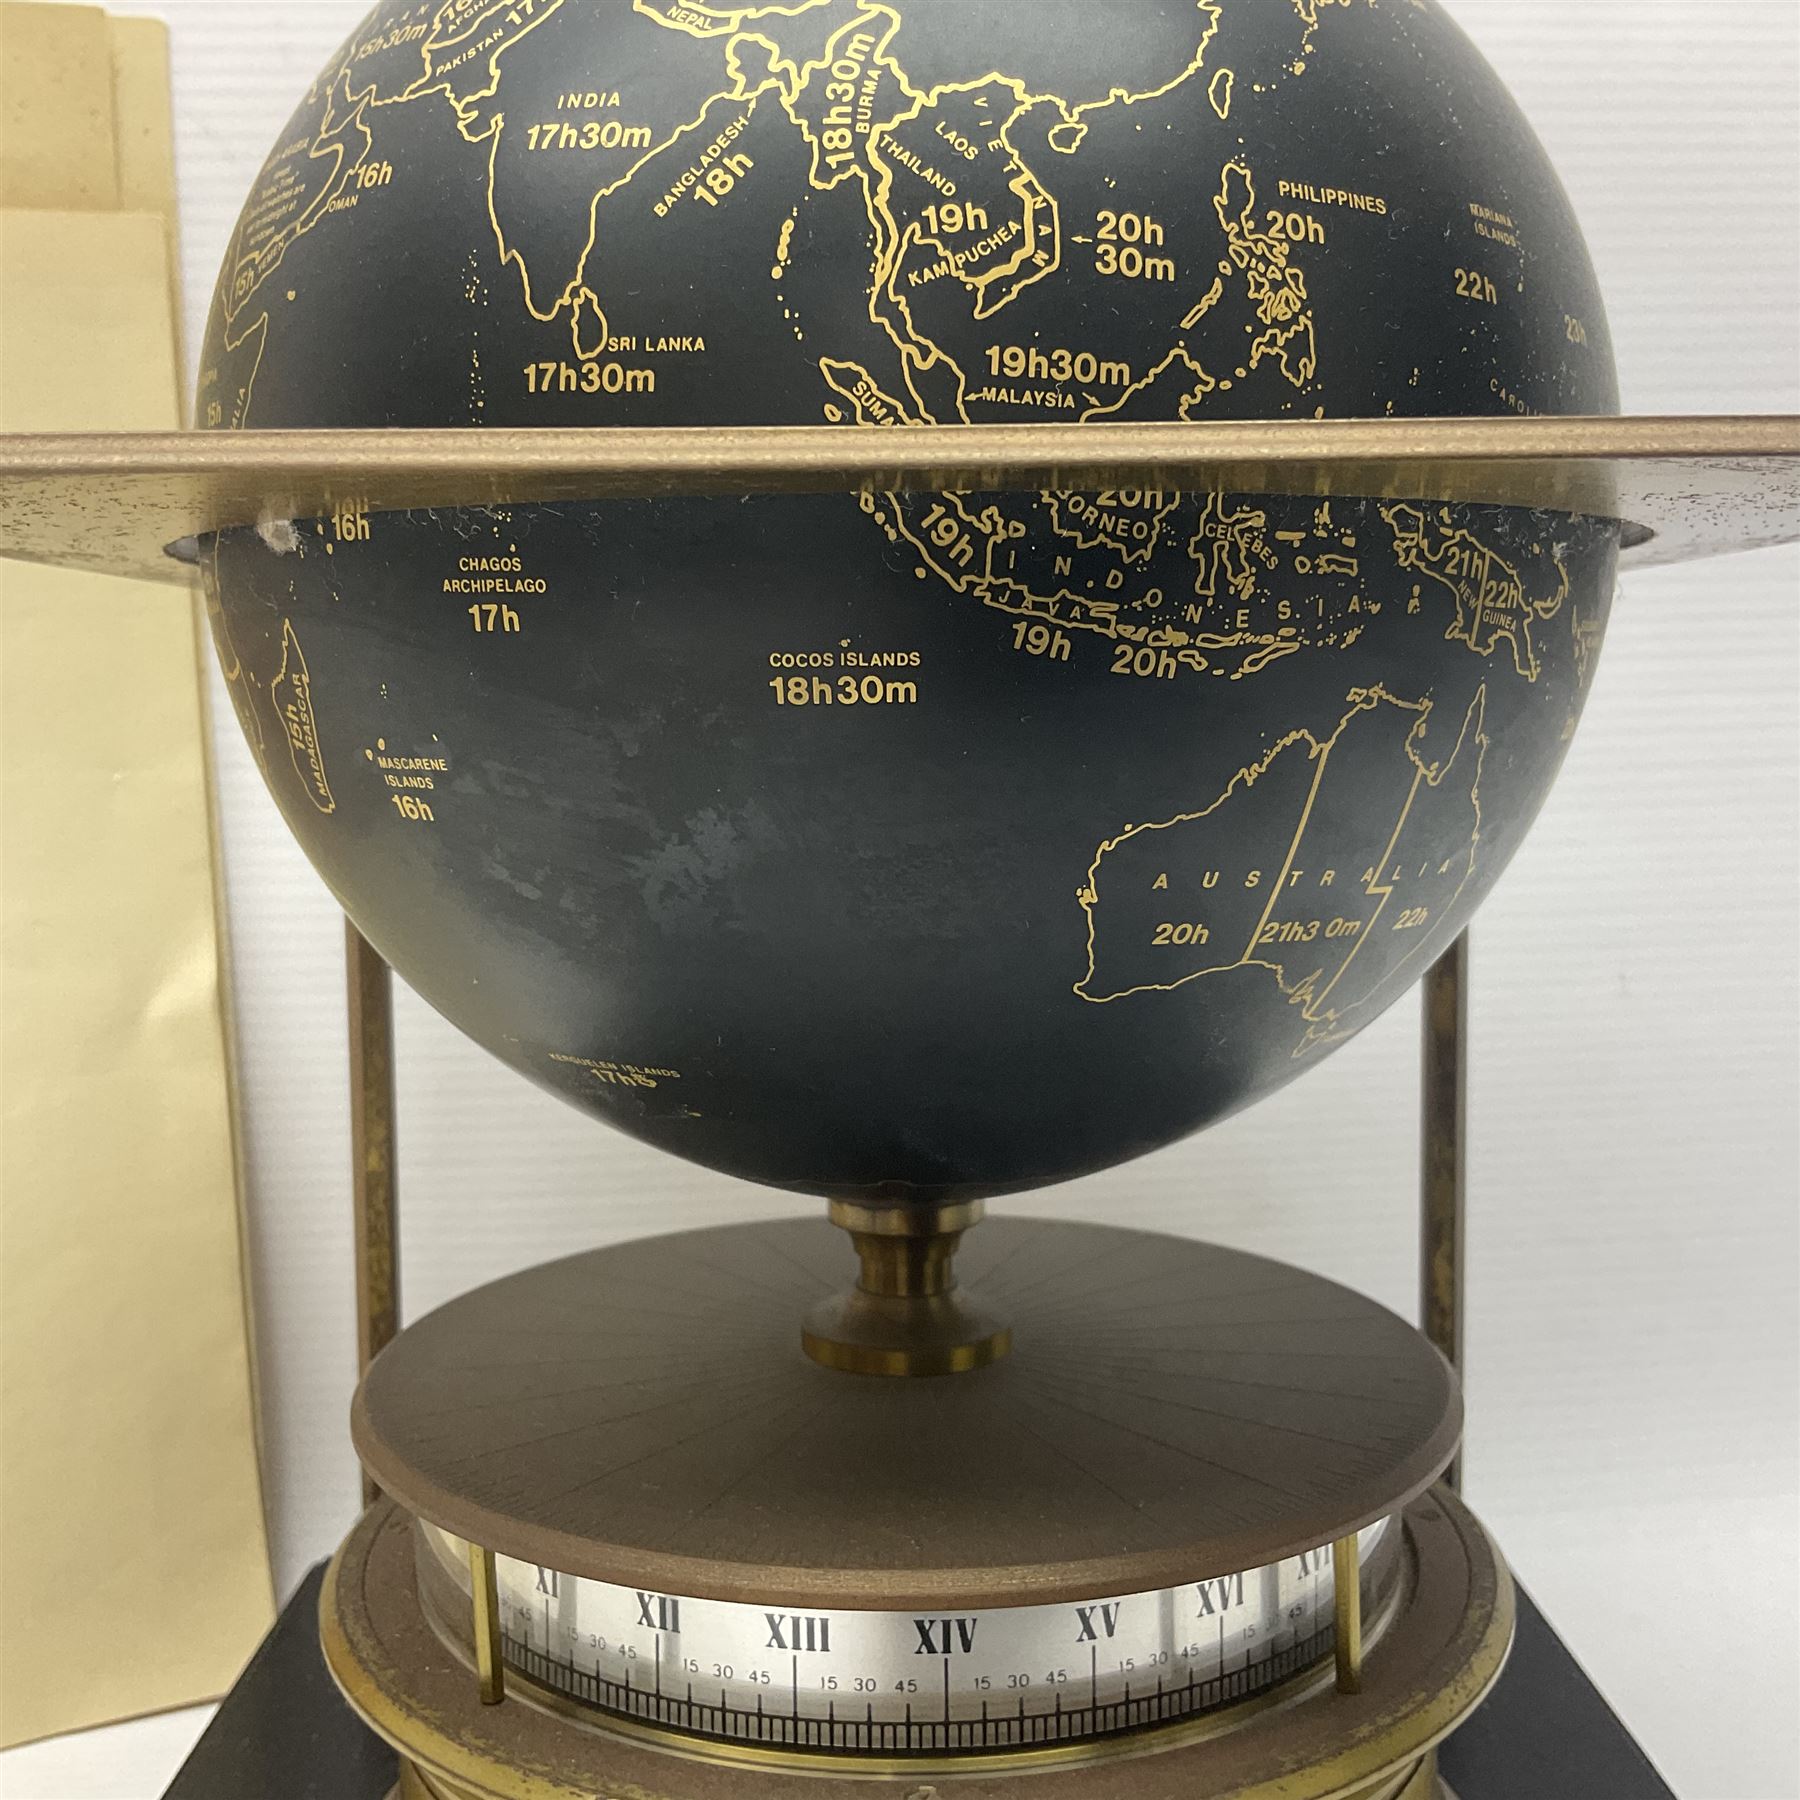 1980 Franklin Mint Royal Geographical Society World Clock with eight day movement indicating current - Image 7 of 11